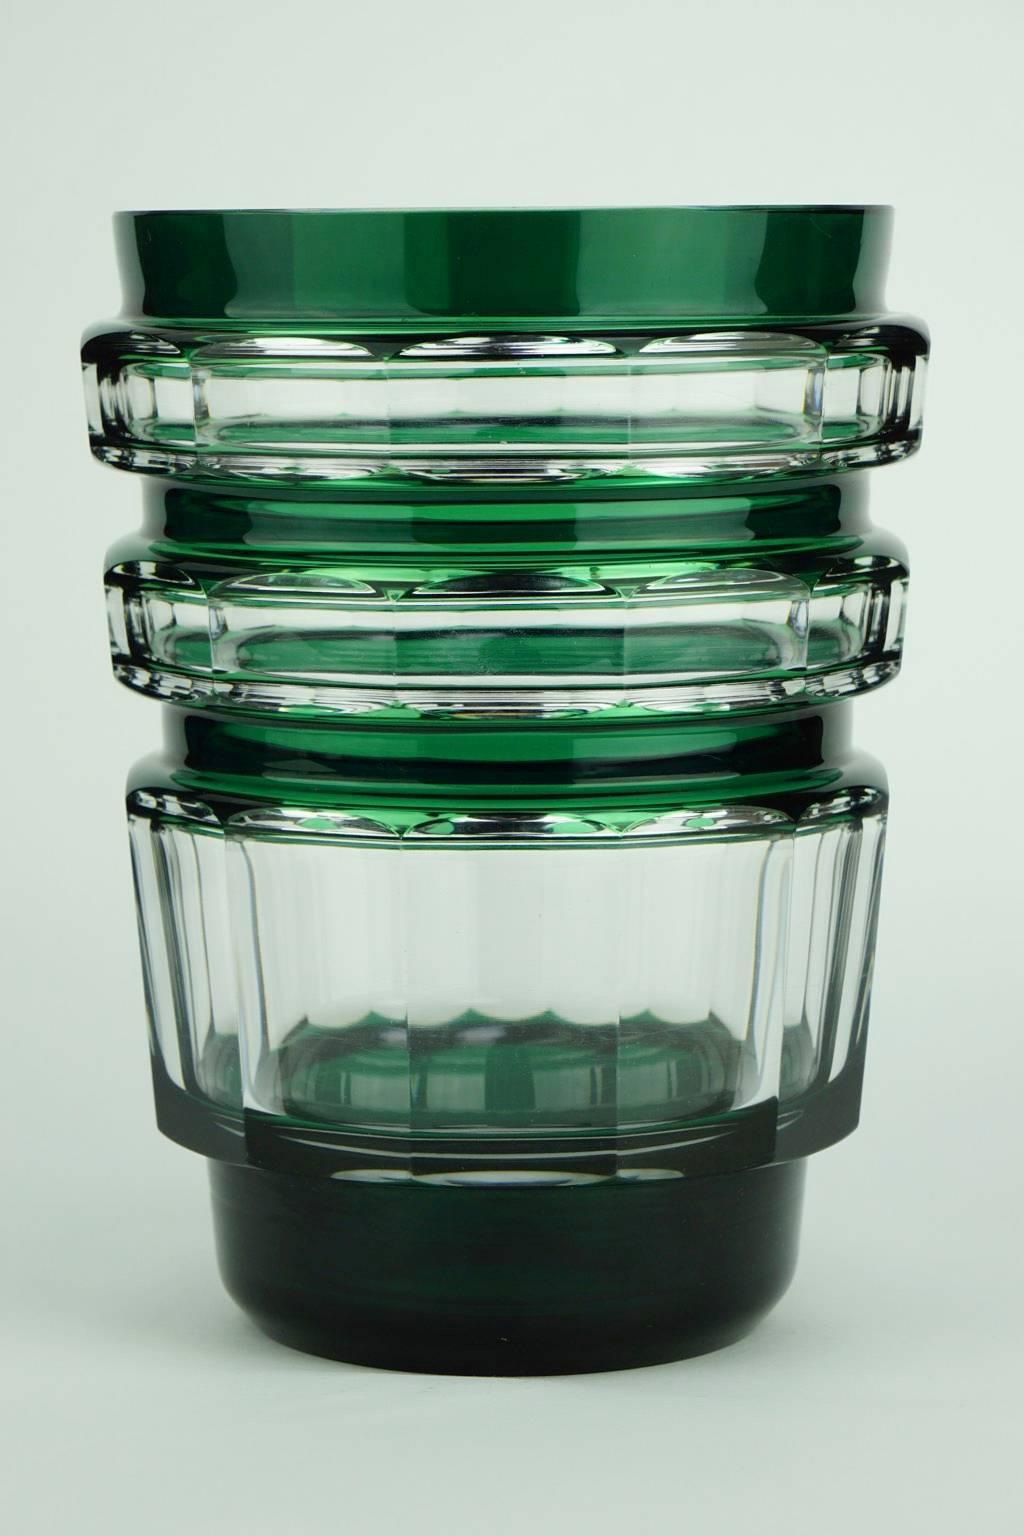 Large Art Deco vase in thick glass with flushed green by Joseph Simon (1874-1960) for Val Saint Lambert.

Measures: D base 11 cm., D top 15 cm., H 21.5 cm.